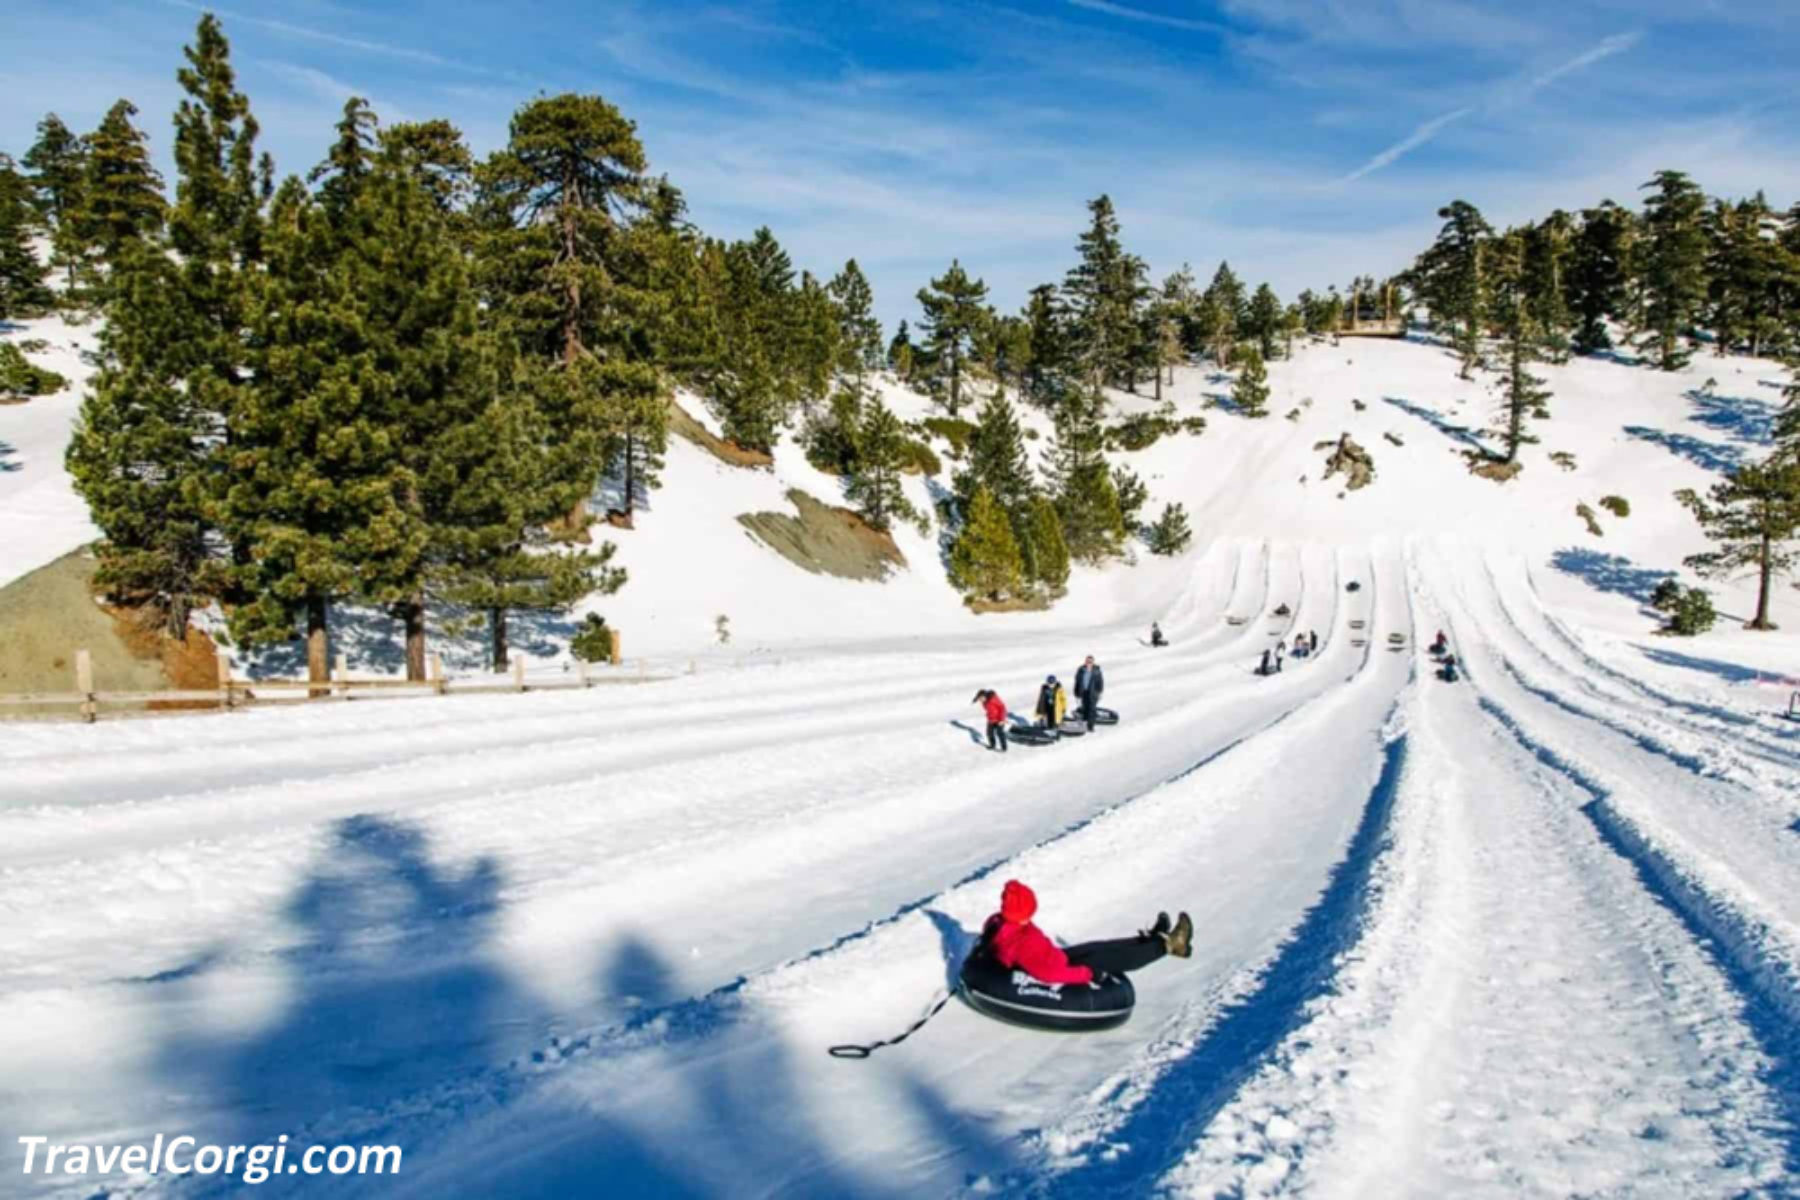 The Best 10 Things To Do In Wrightwood California